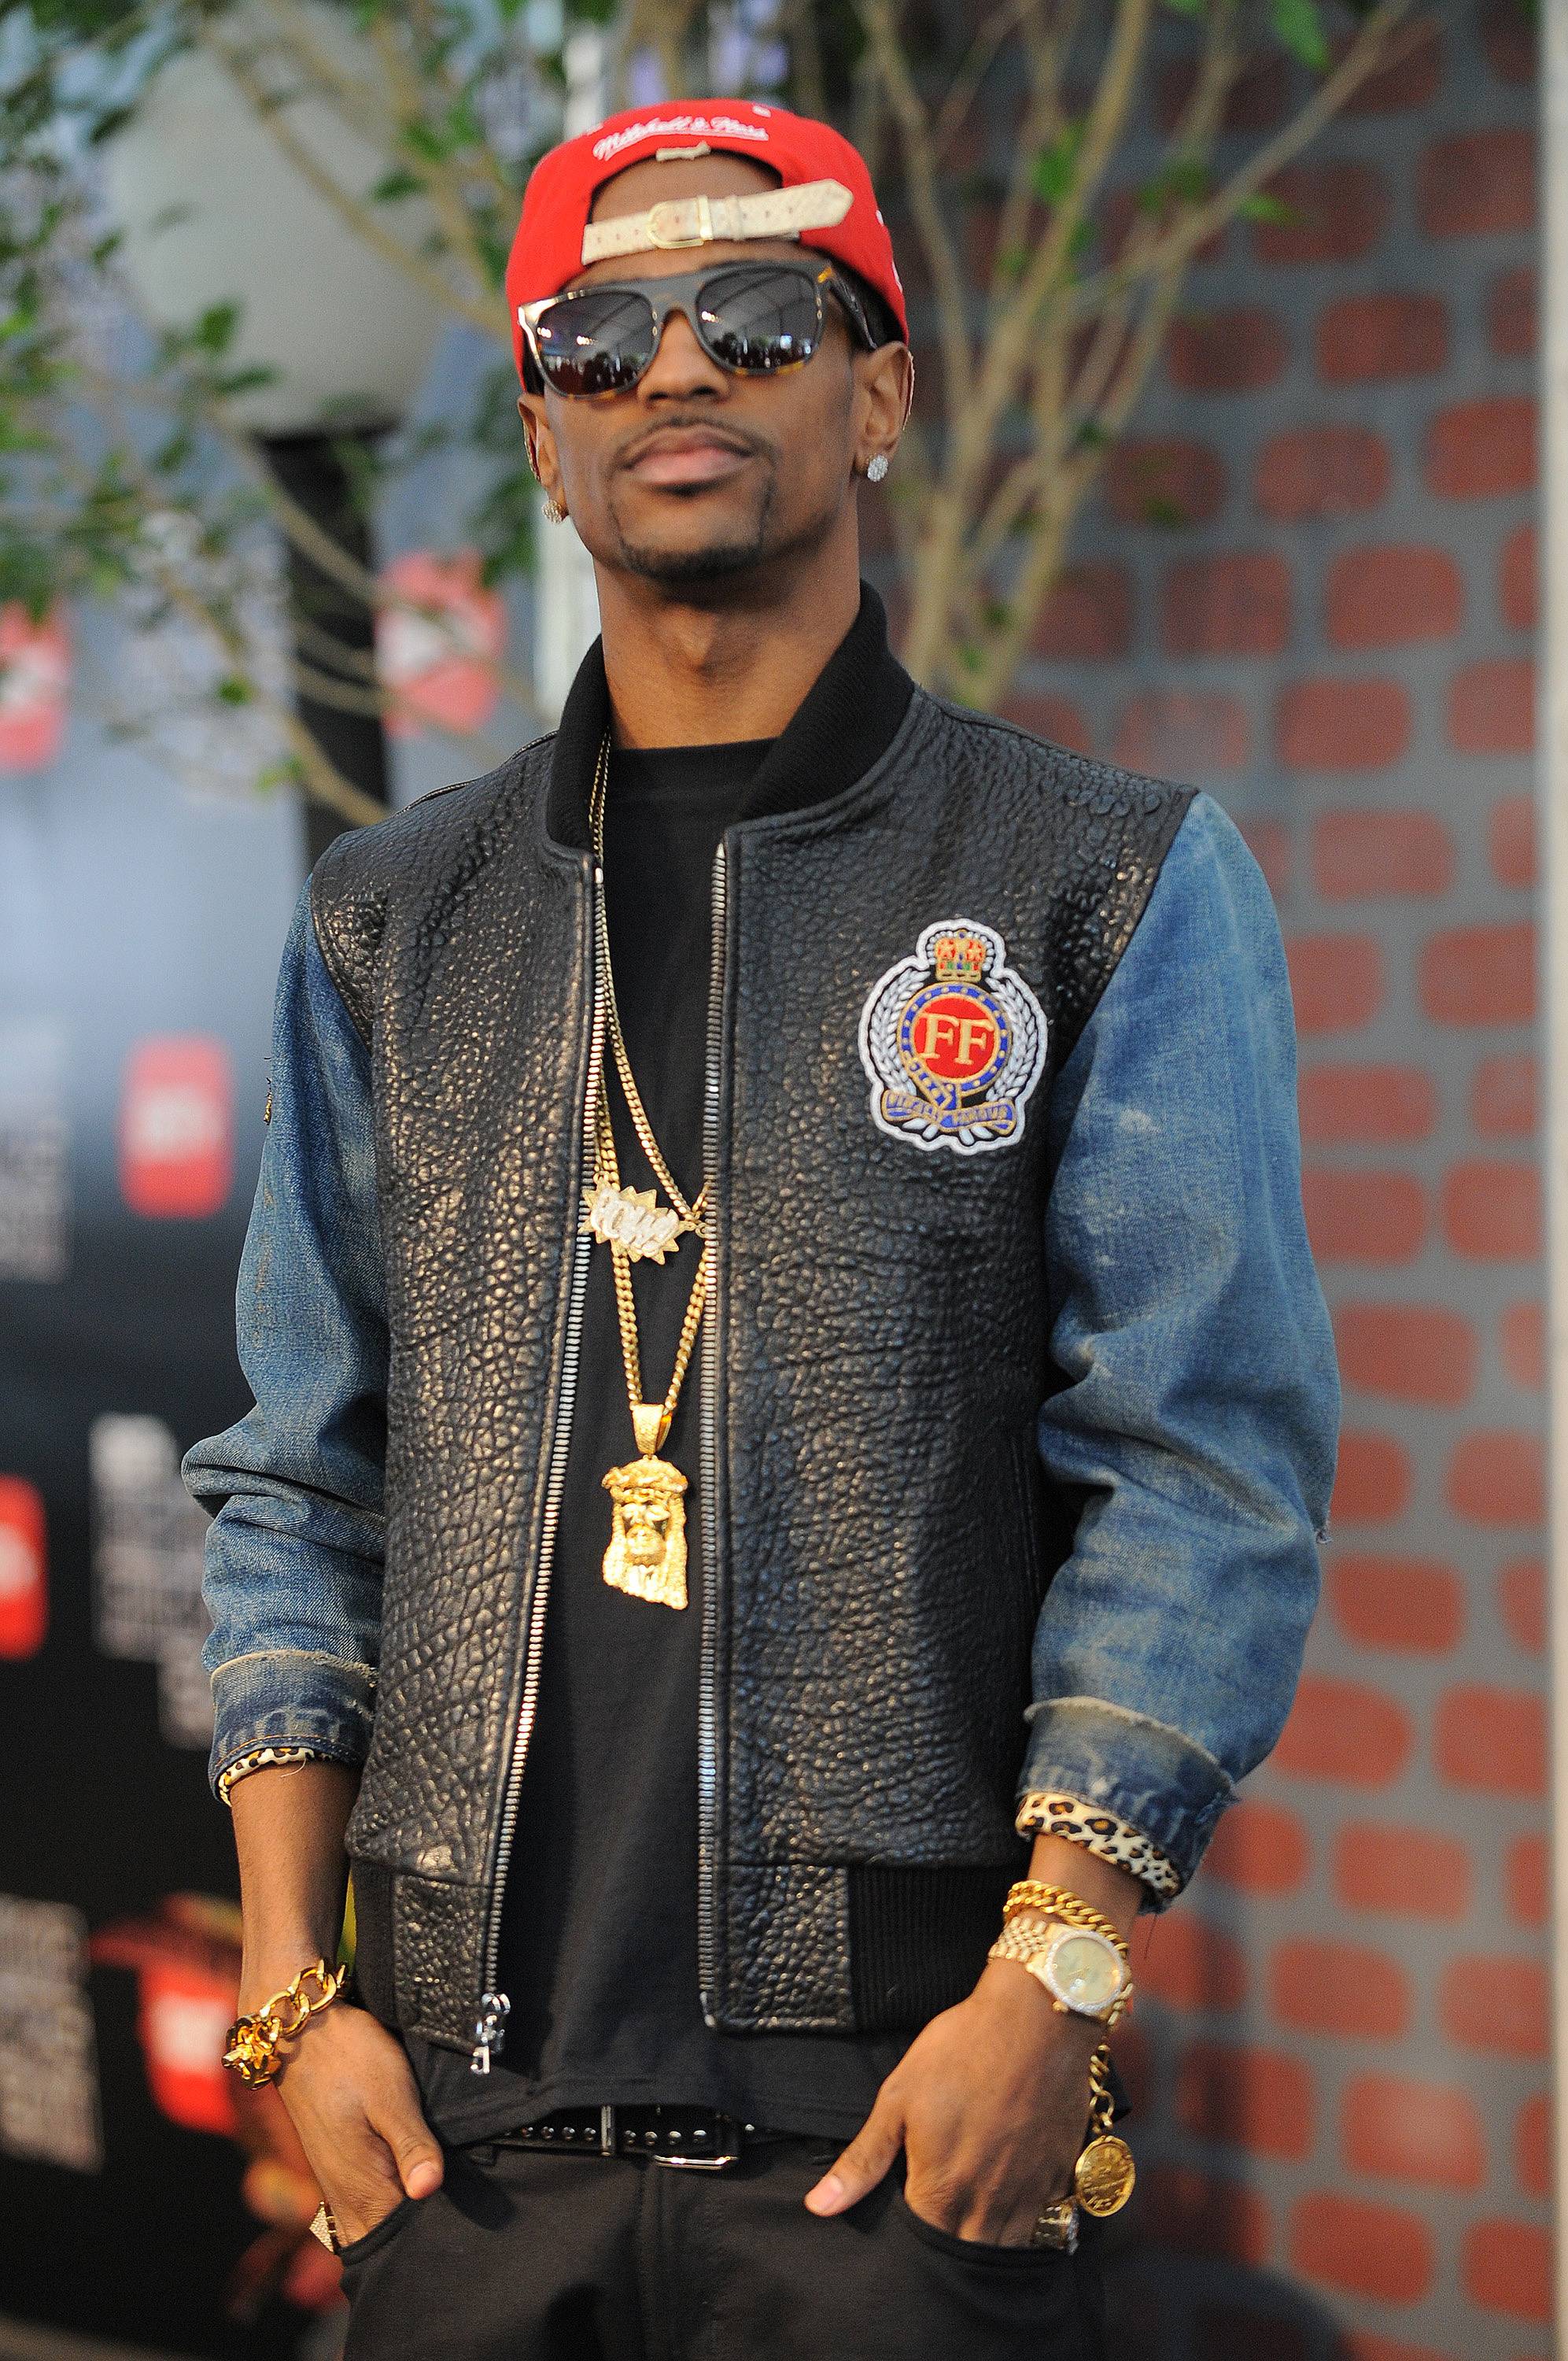 Big Sean (@BigSean)&nbsp; - TWEET: &quot;2 chainz ain't have no brass knuckles, it was a 4 finger ring that spelled hood&quot;&nbsp;Big Sean attempts to clear the air about 2 Chainz's mistaken arrest.&nbsp;&nbsp;(Photo: Jeff Daly/PictureGroup)